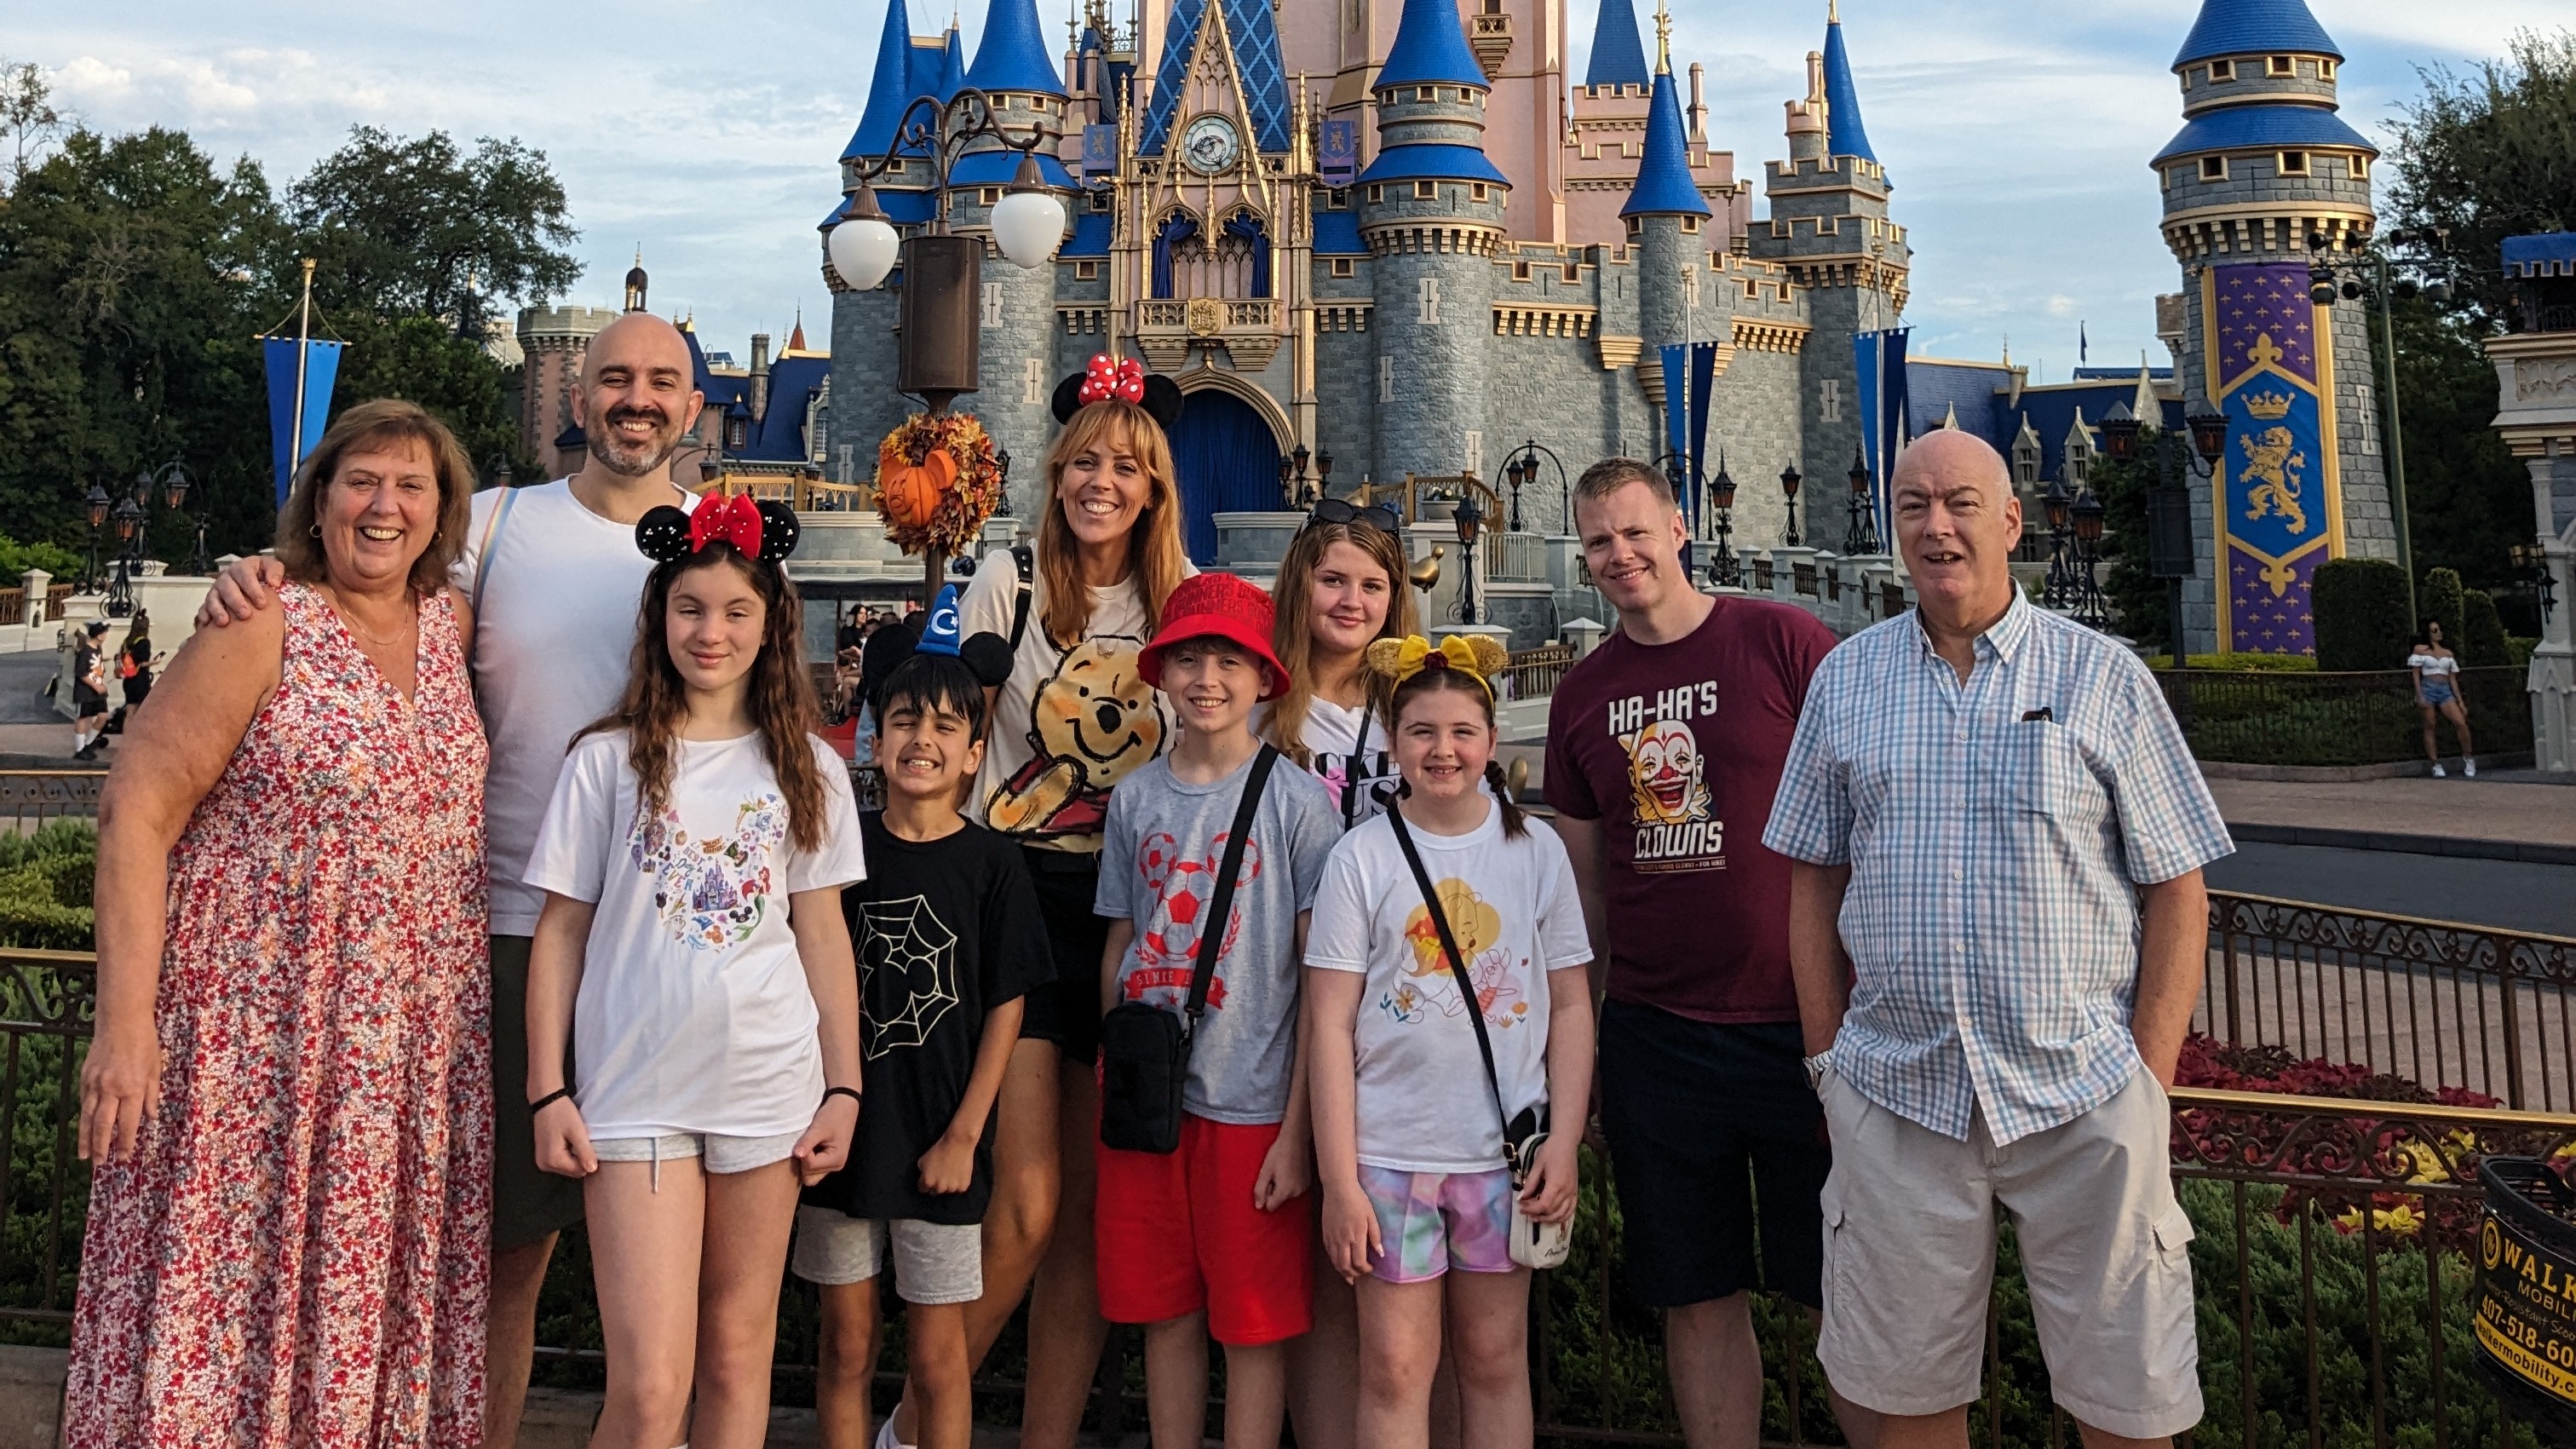 Mark and his family pose in from of the world-famous Cinderella castle